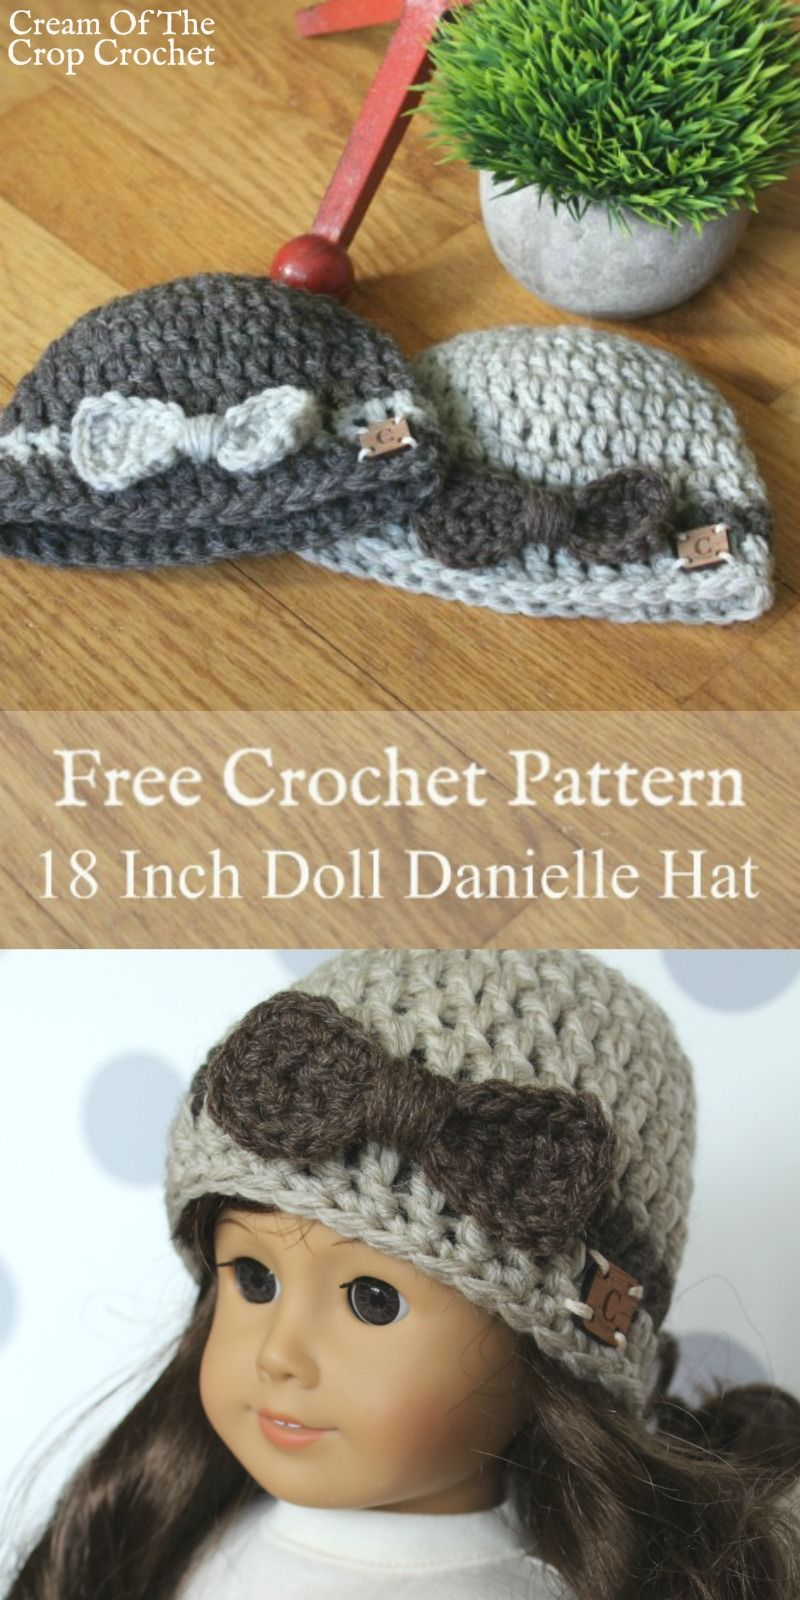 Free Knitting Patterns For Dolls Hats Free Crochet Patterns For 18 Inch Dolls 18 Inch Doll Danielle Hat